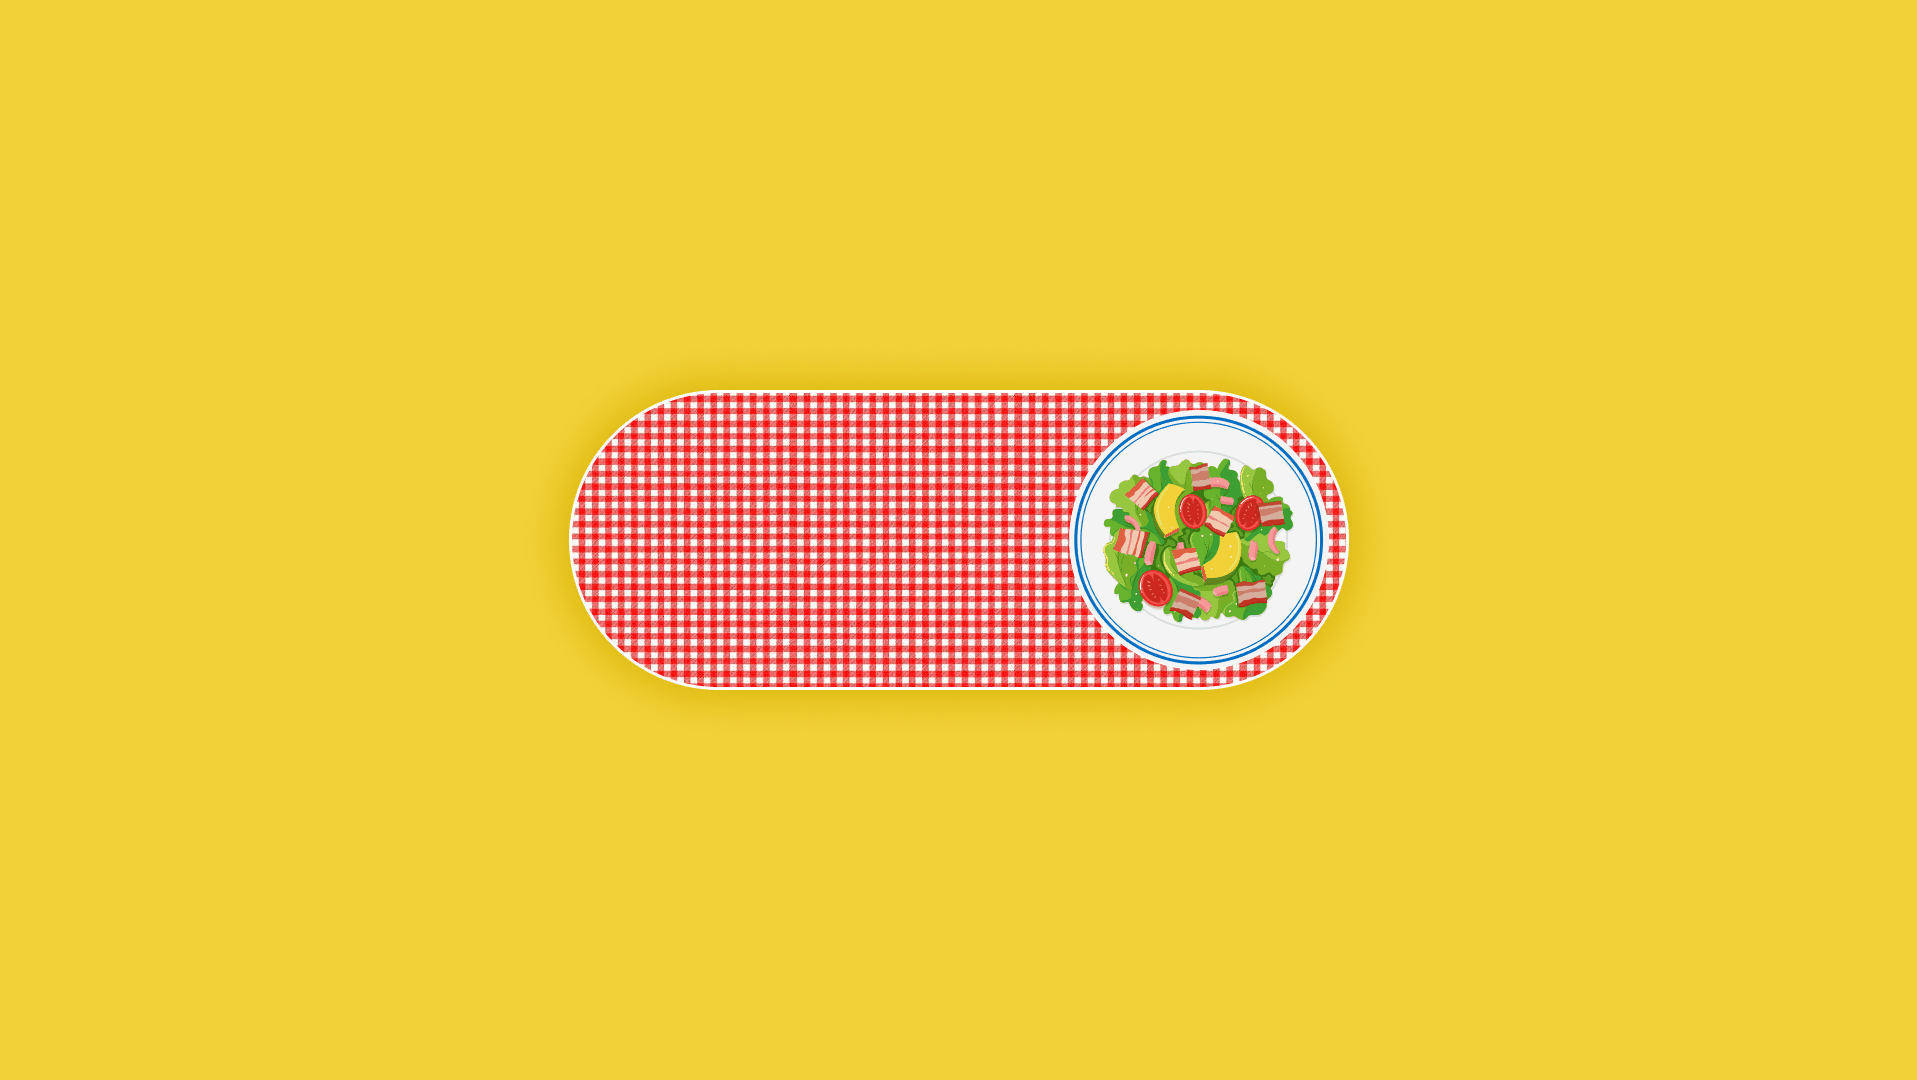 On/Off Switcher - Daily UI #015 015 challenge concept dailyui design food italian off on salat switcher ui